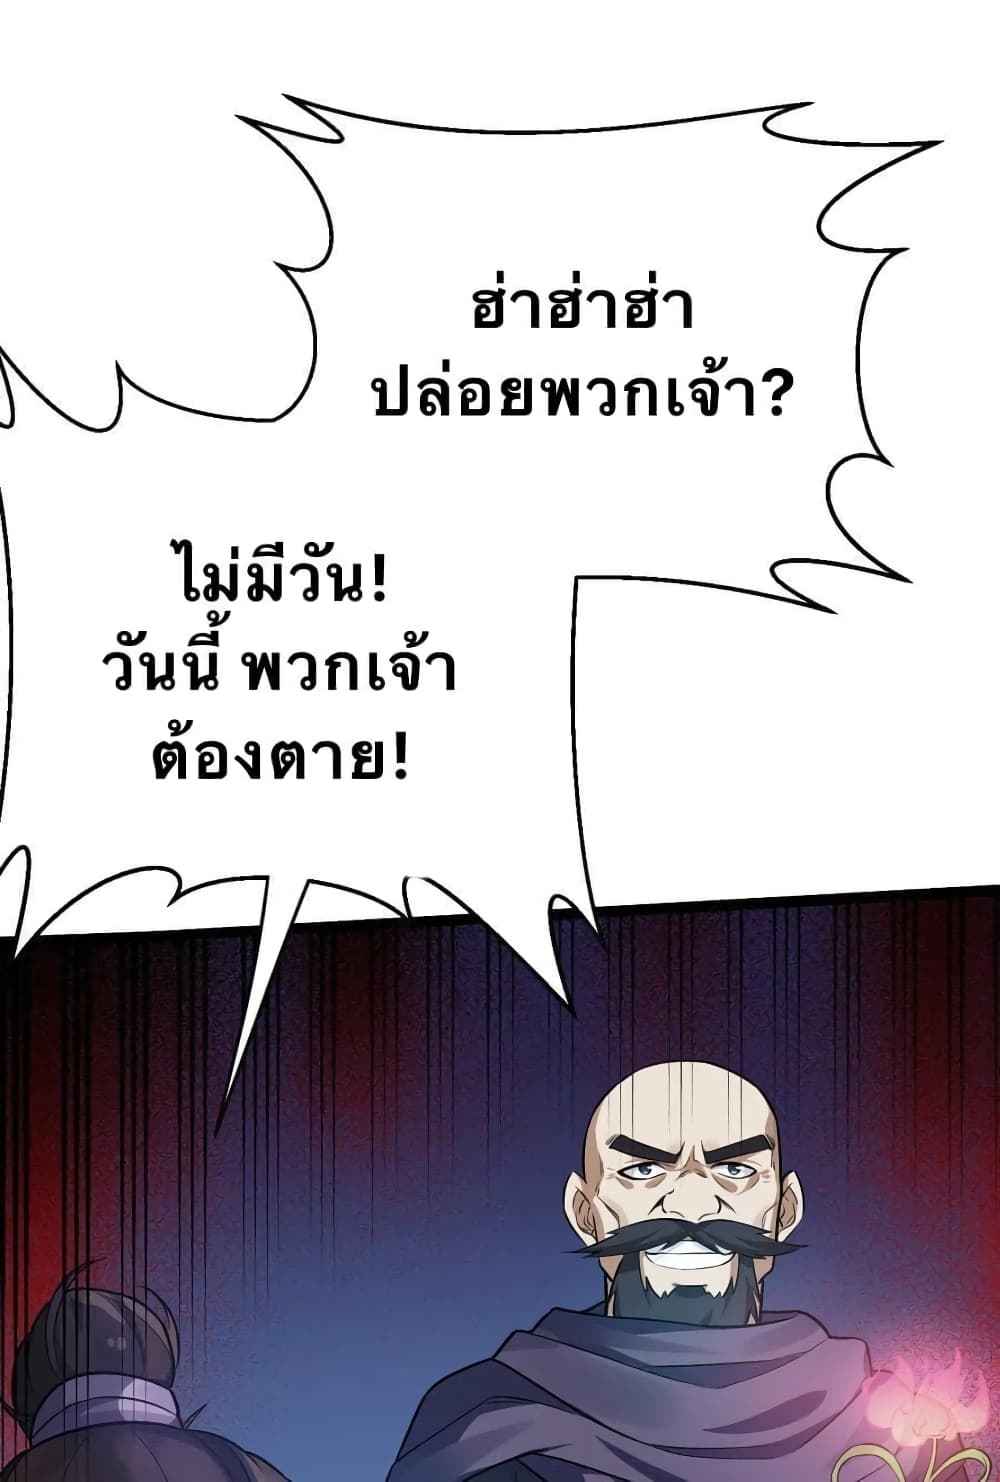 Godsian Masian from Another World 11 แปลไทย